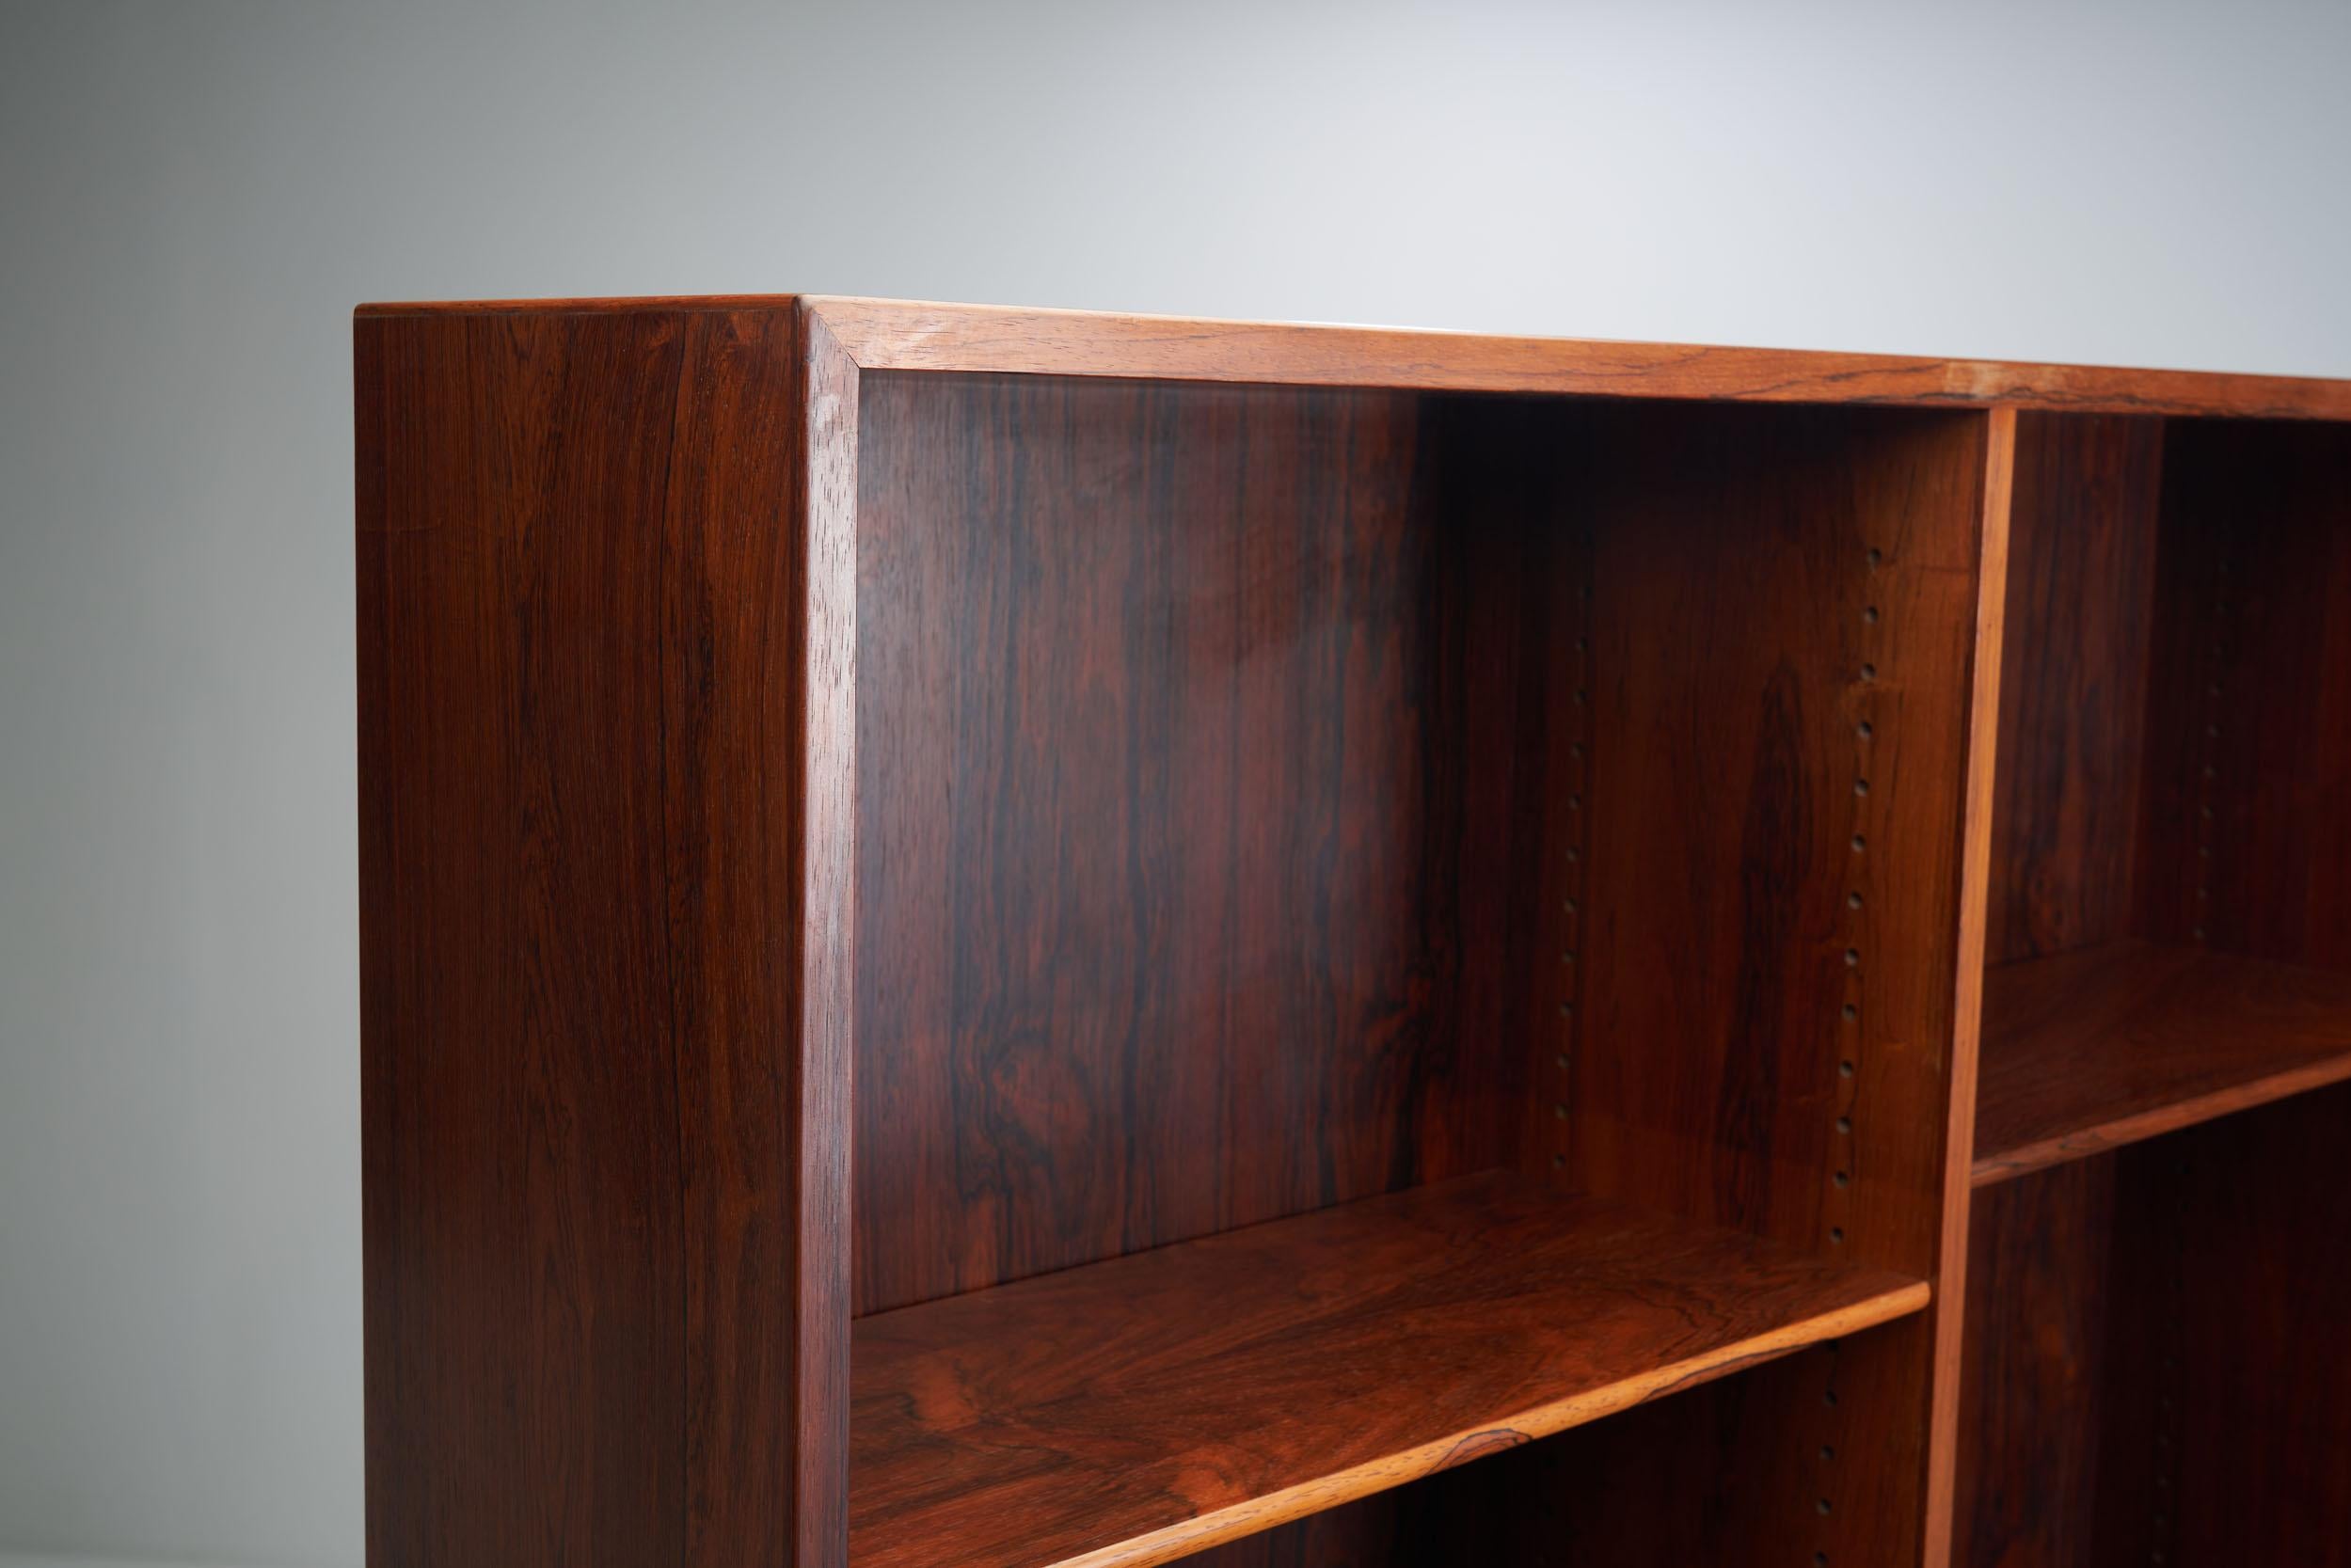 Two Bookcases by Børge Mogensen for C. M. Madsen, Denmark, 1950s For Sale 3